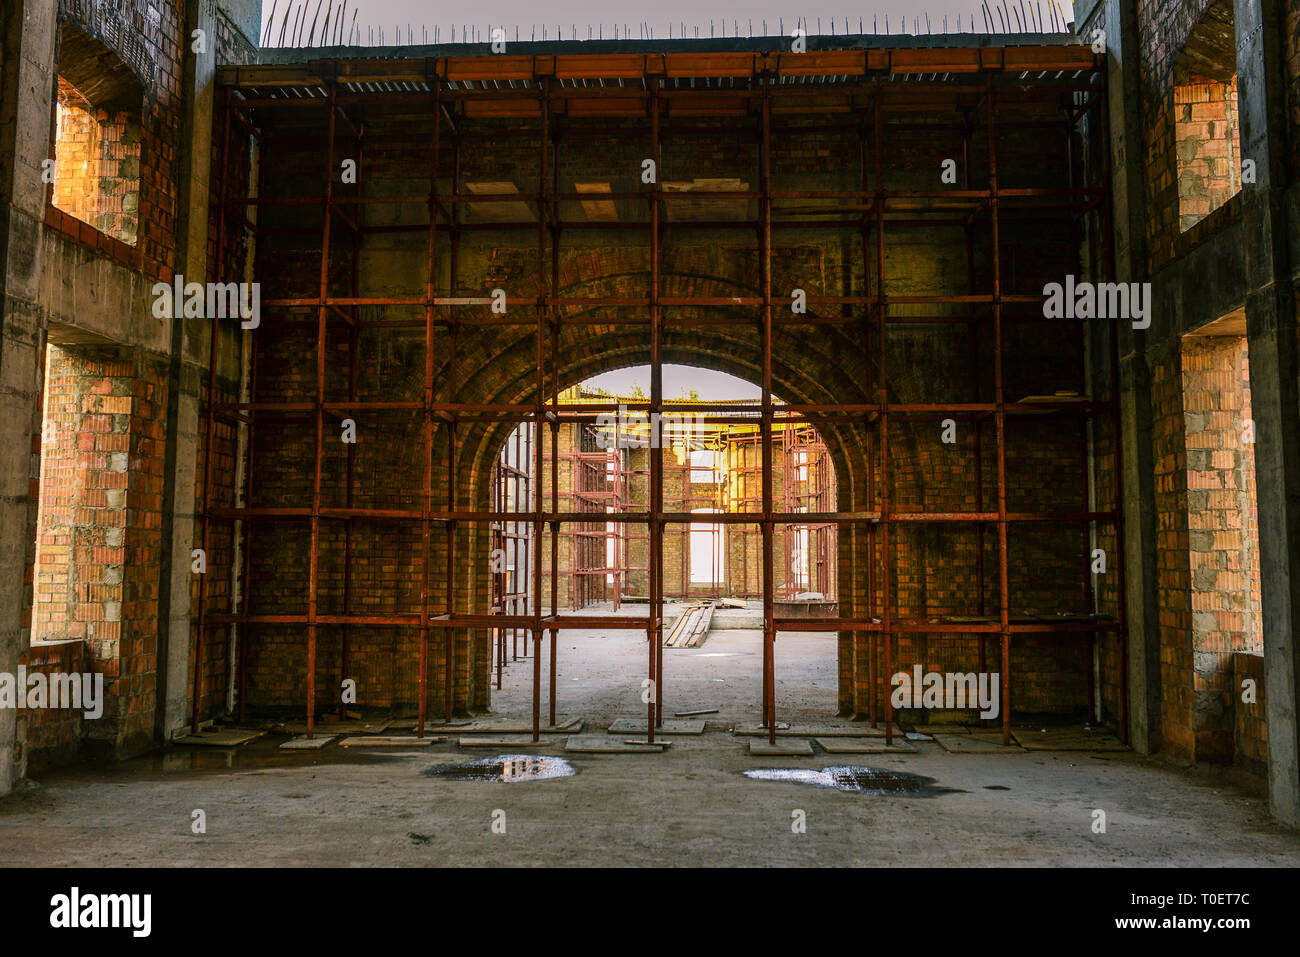 Construction of the building. Large arch of brick. Building scaffolding on a house under construction. Concrete floor Stock Photo